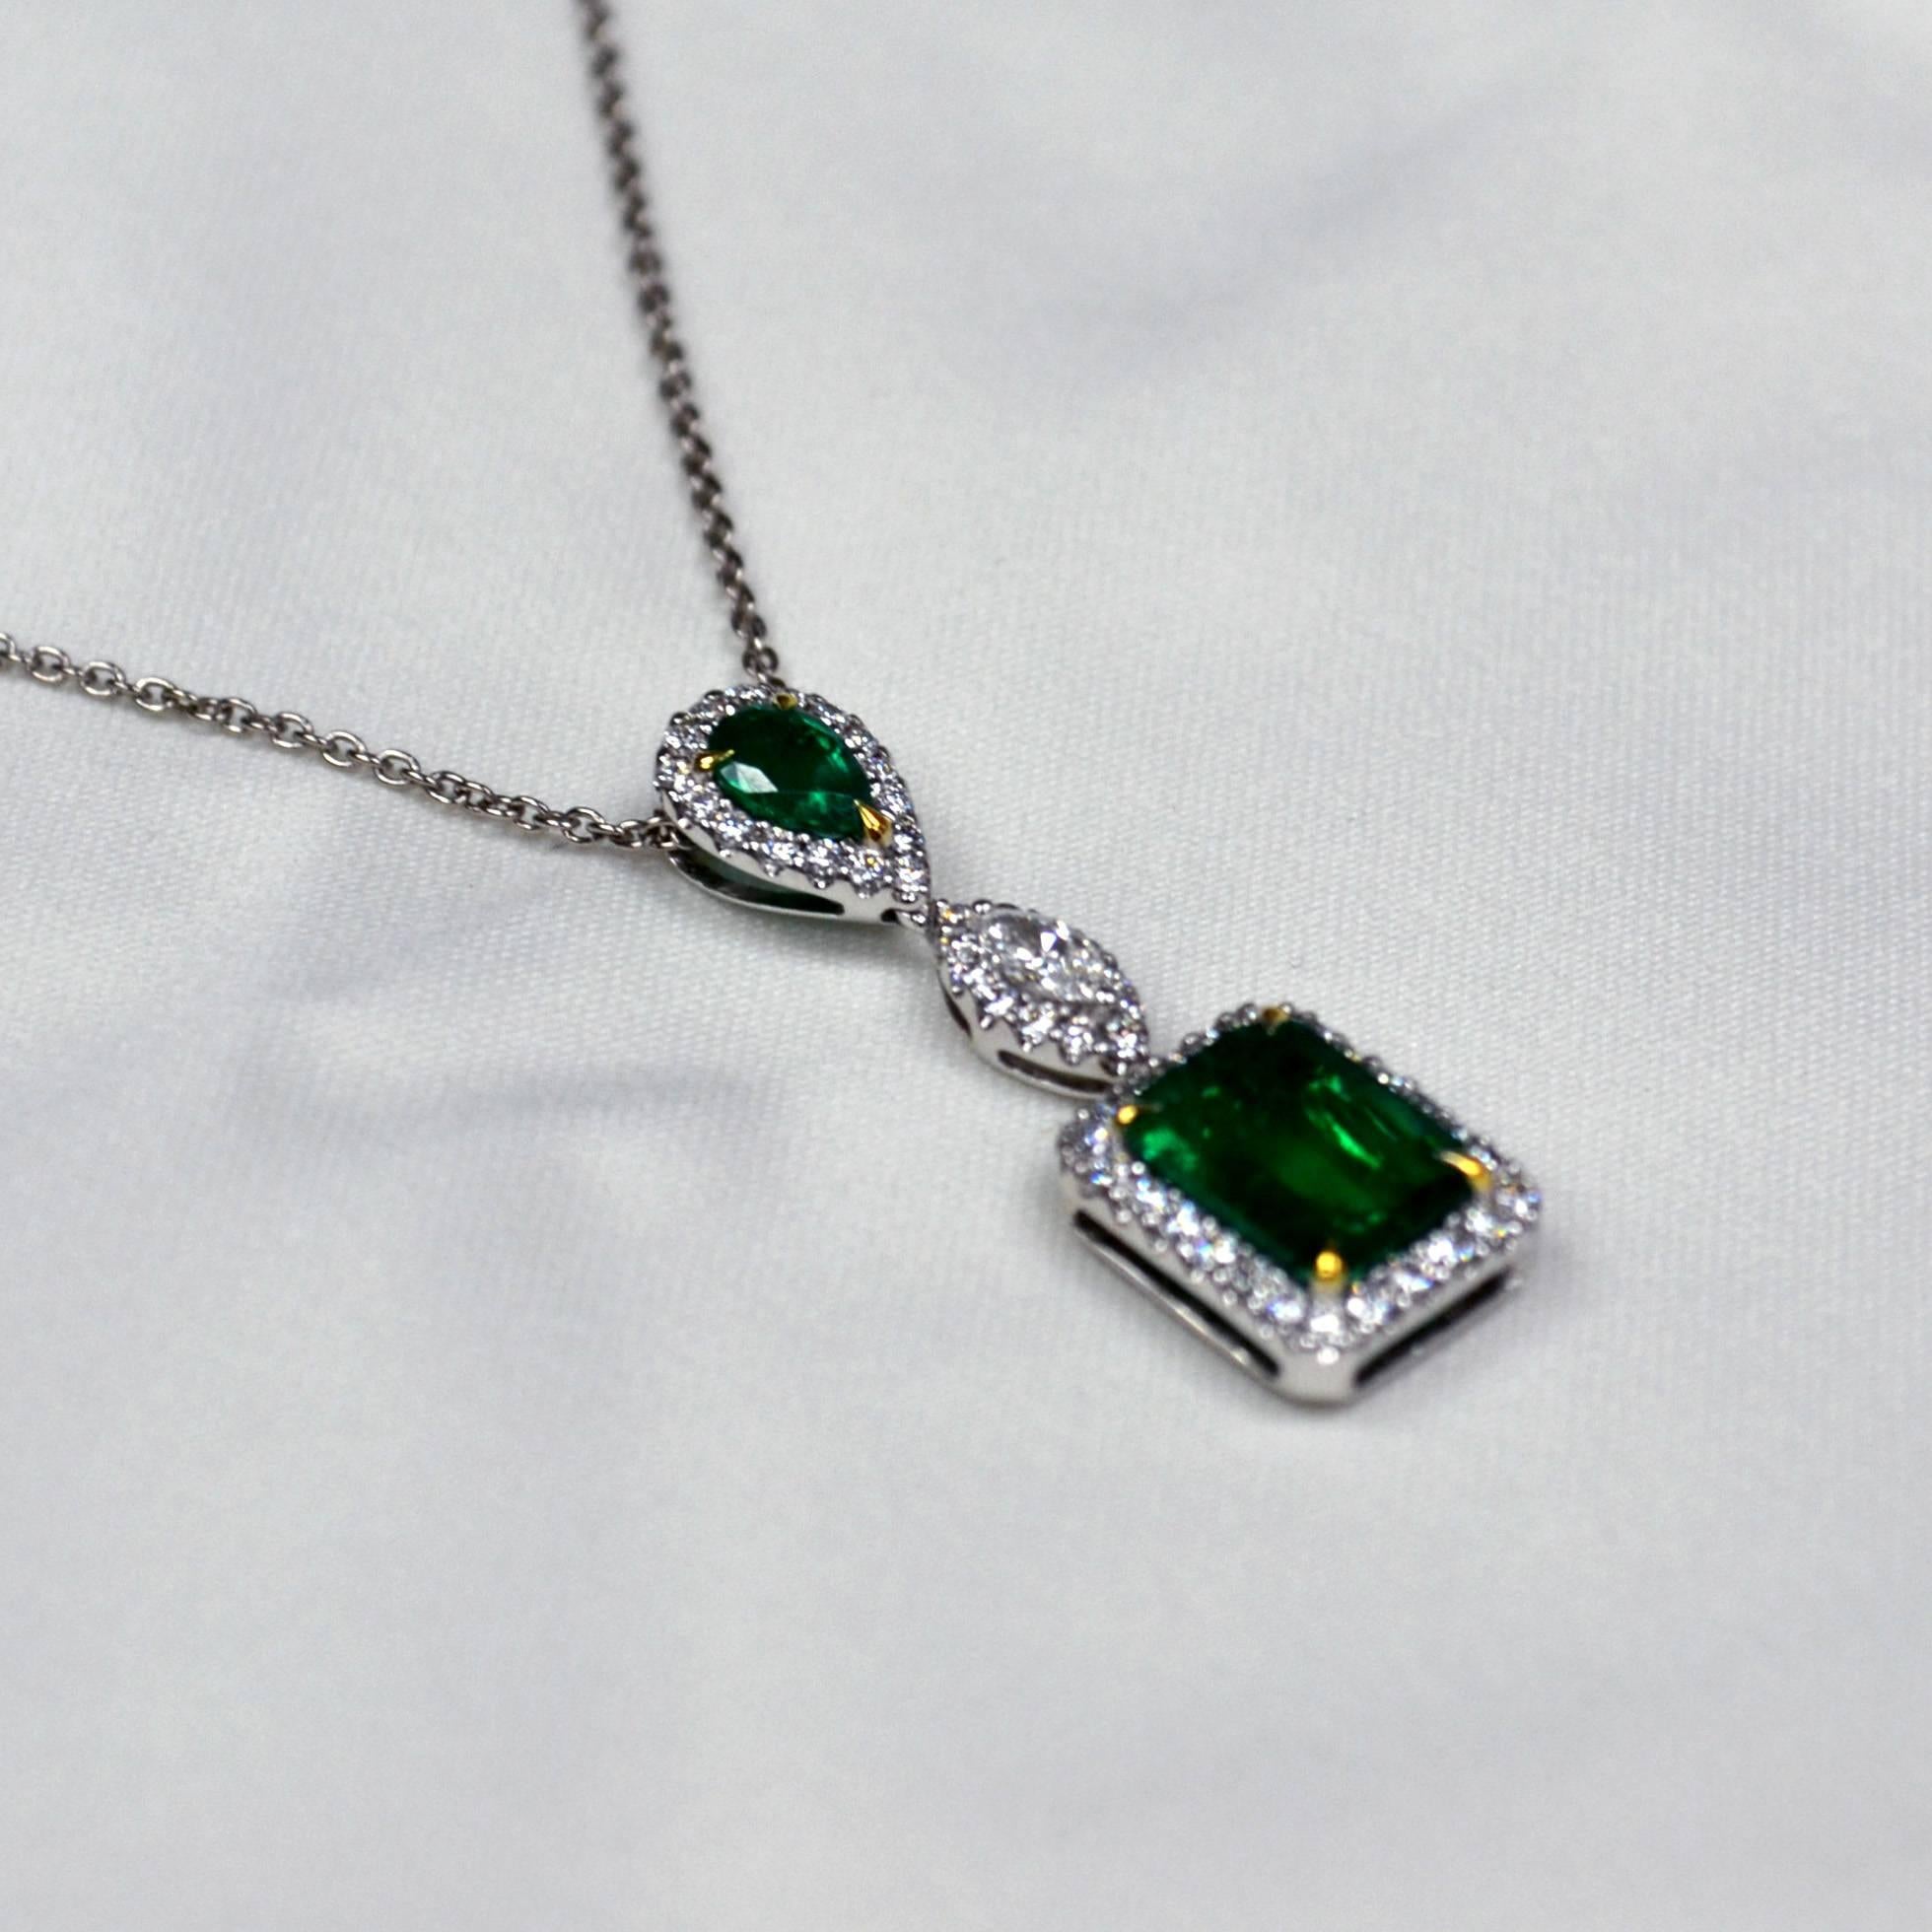 Necklace in 18 karat white gold set with 2 intense green emerald cut Zambian Emeralds (1.95 carats) and 24 round brilliant-cut Diamonds (0.26 carats).

Length of lobster clasp chain: 17 inches.
